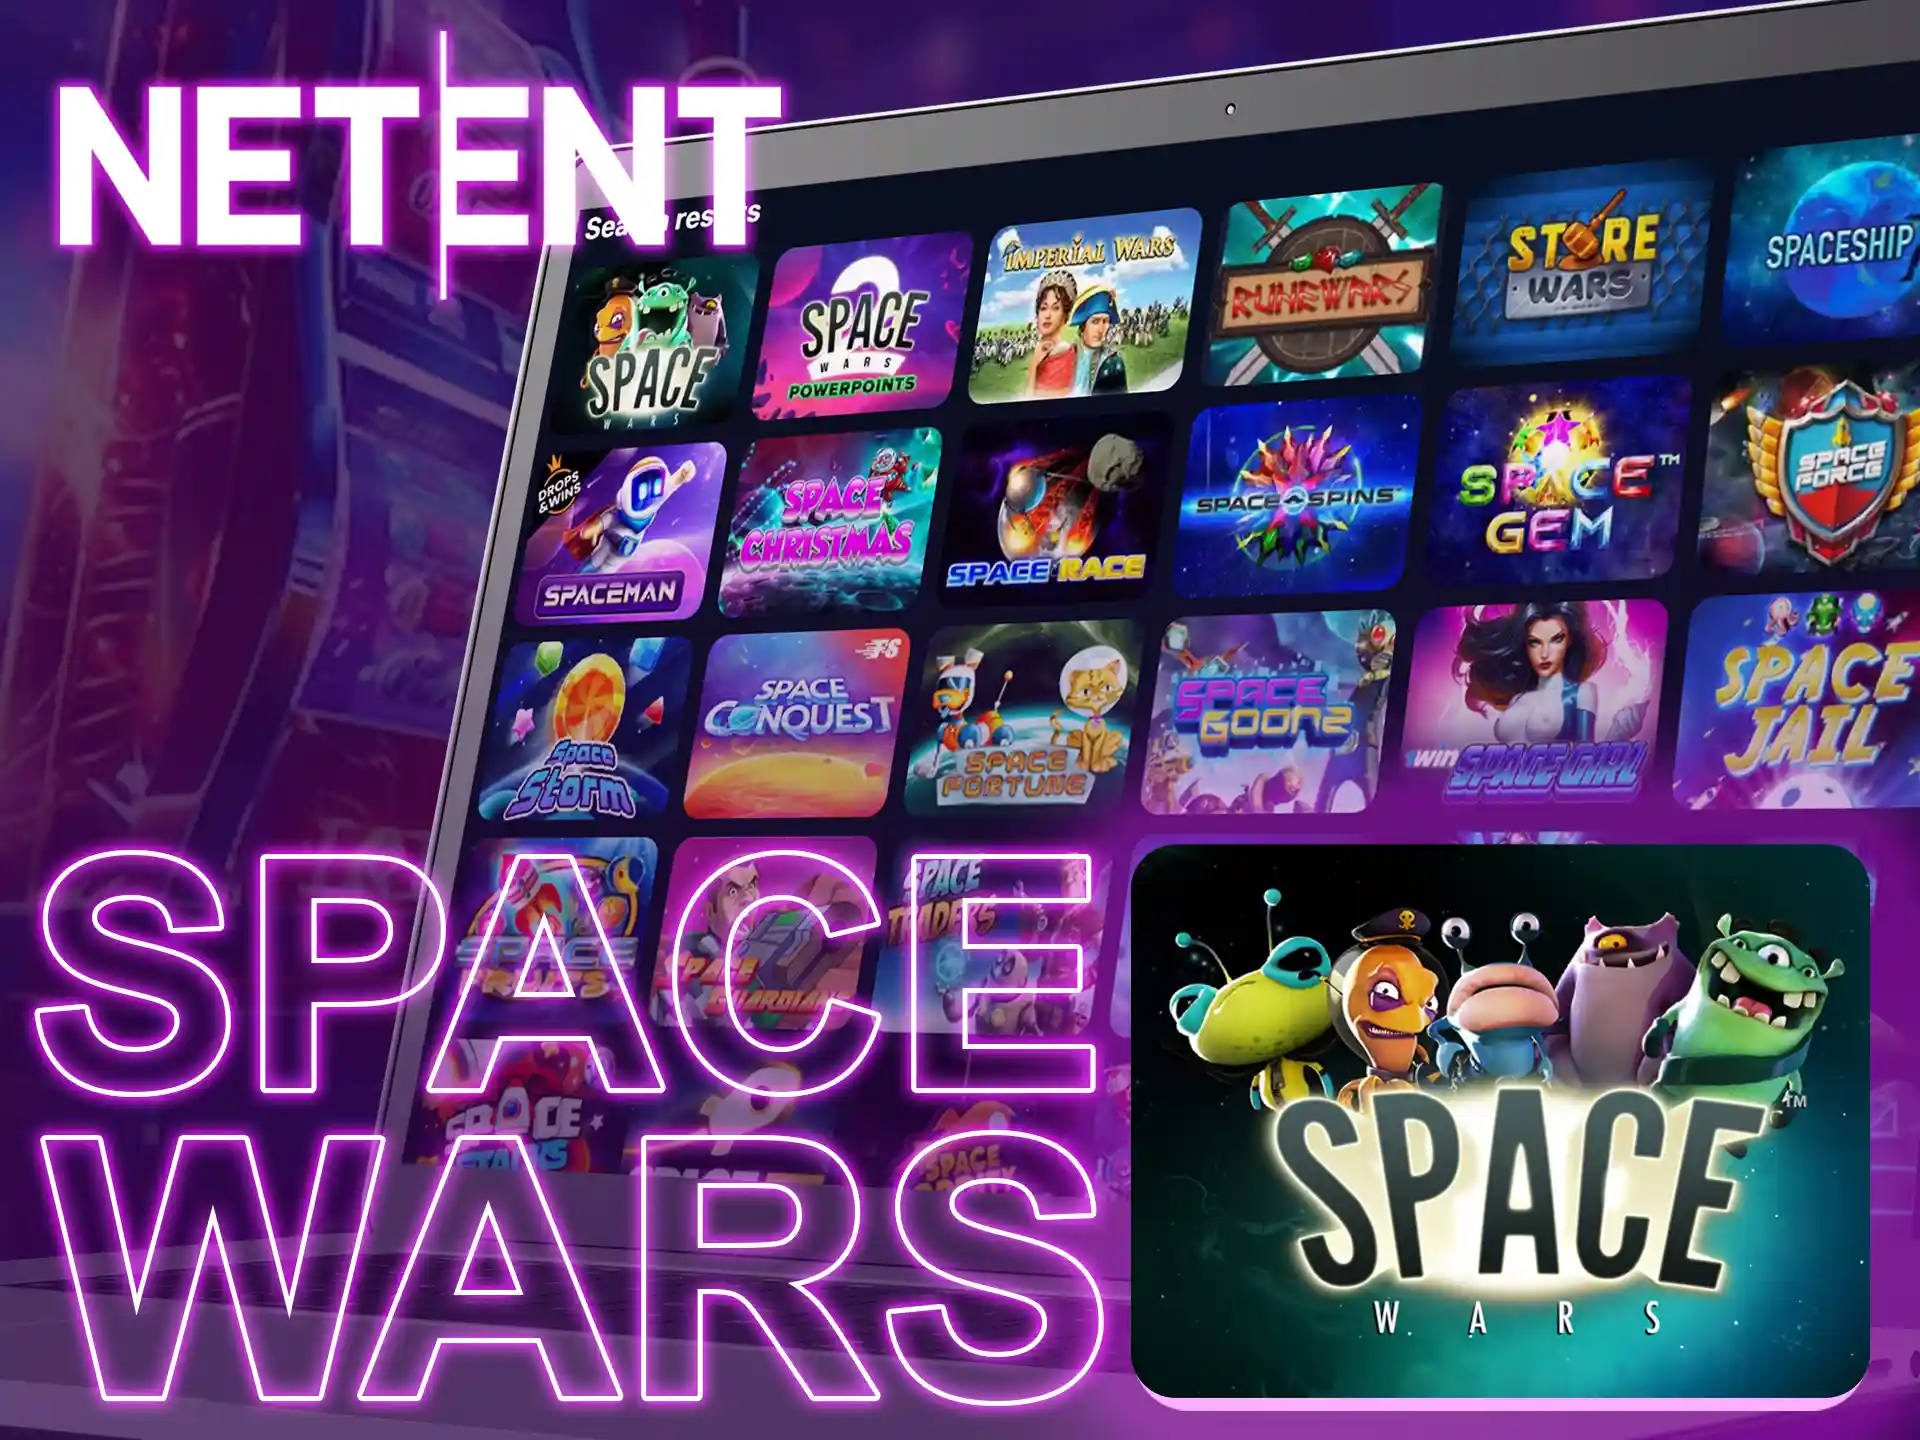 Provider Netent is pleased to present an unusual Space Wars slot in three-dimensional format.